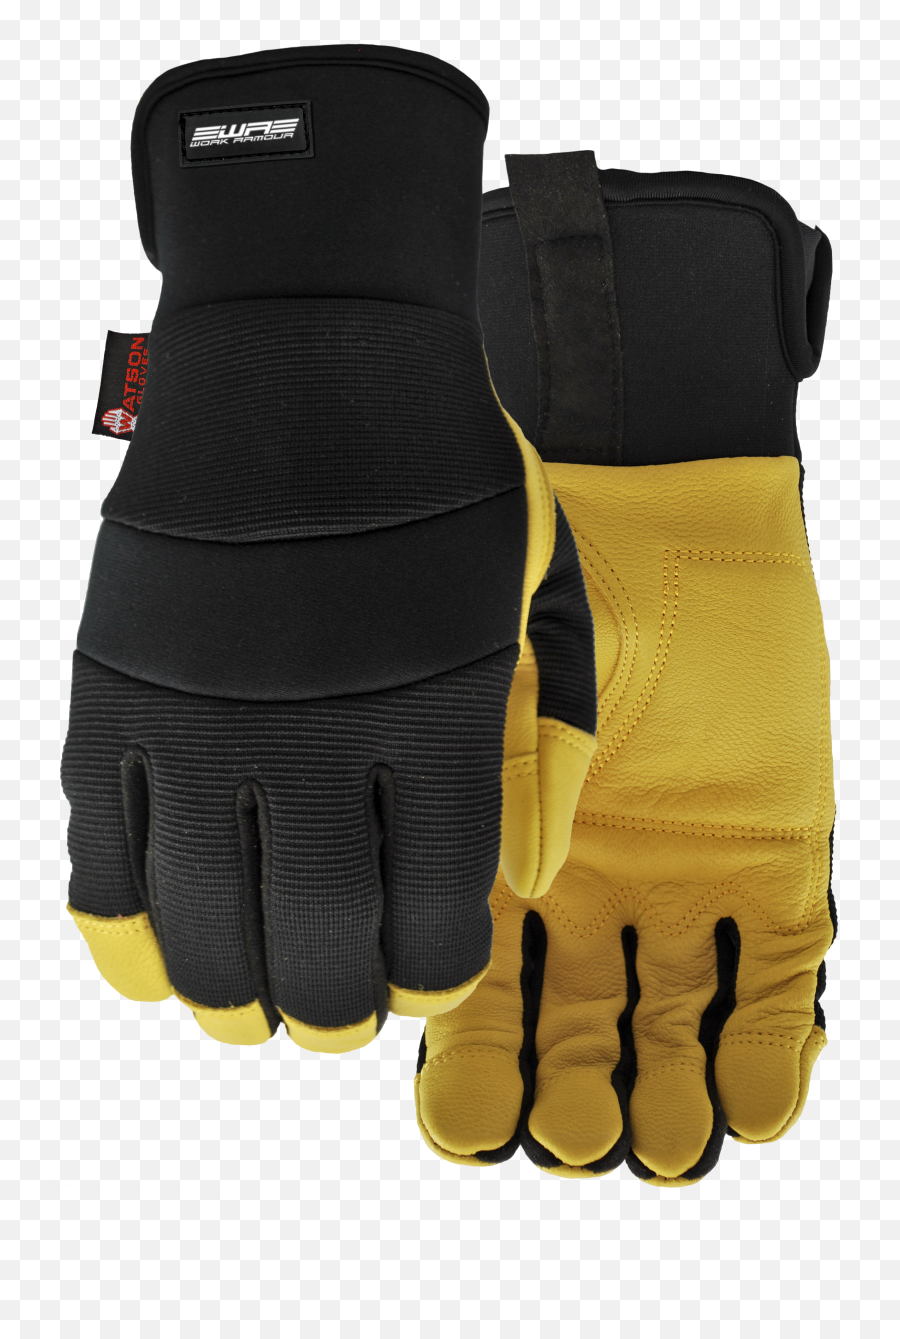 014 Viper - Watson Gloves 9014 Viper Watson Gloves Png,Viper Png